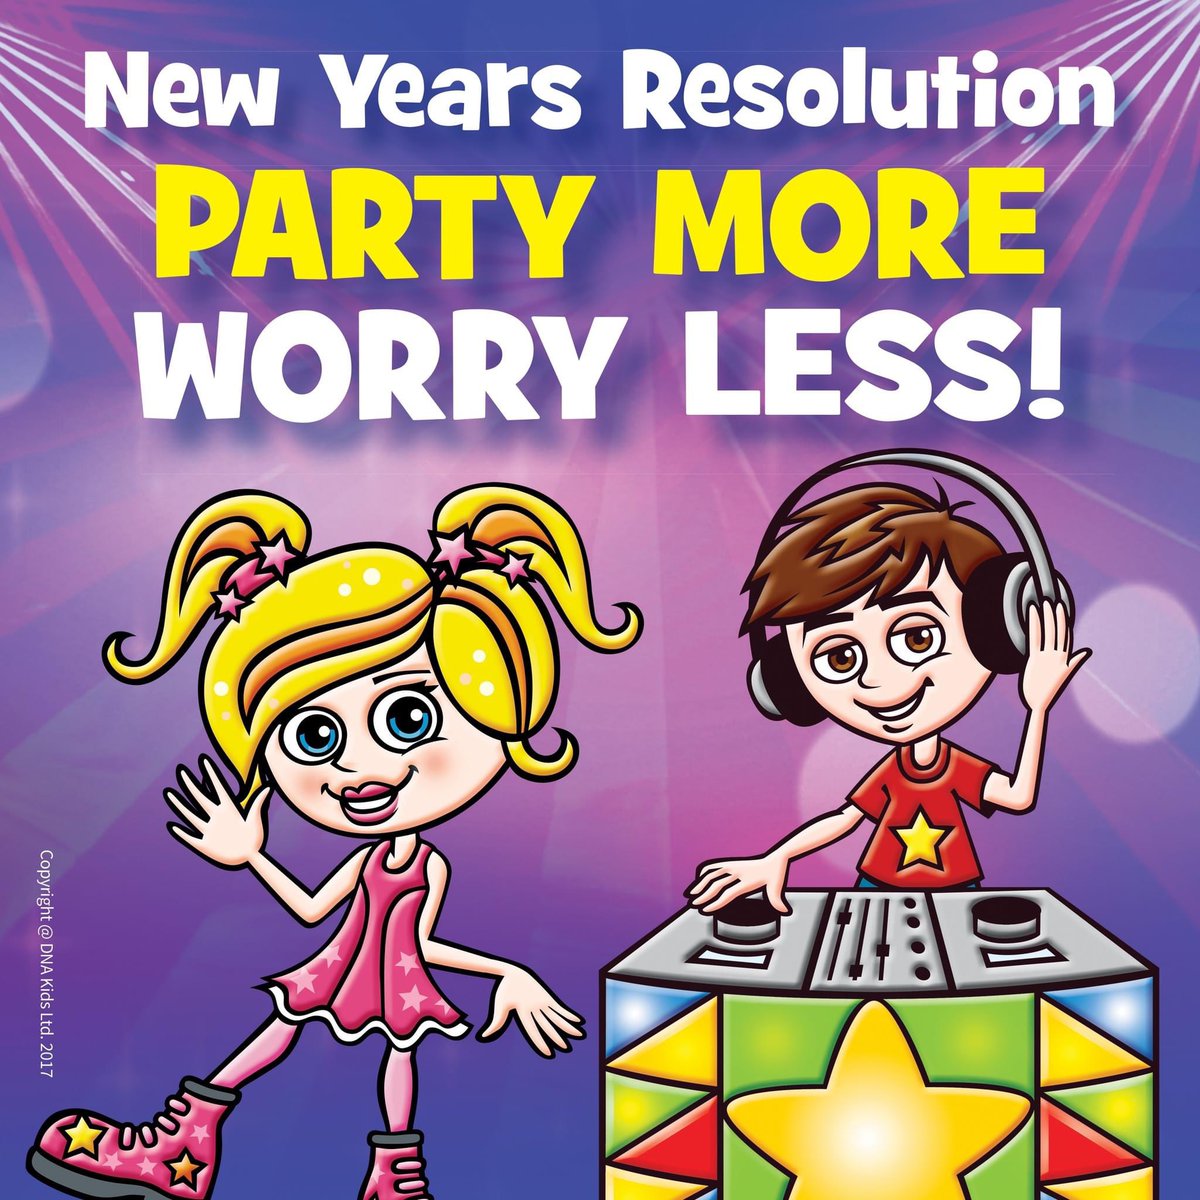 YES to this! 🎉 Have you thought of your new years resolution yet? #newyearresolution #newyearresolution2024 #party #partyanimal #kidsparties #dnakids